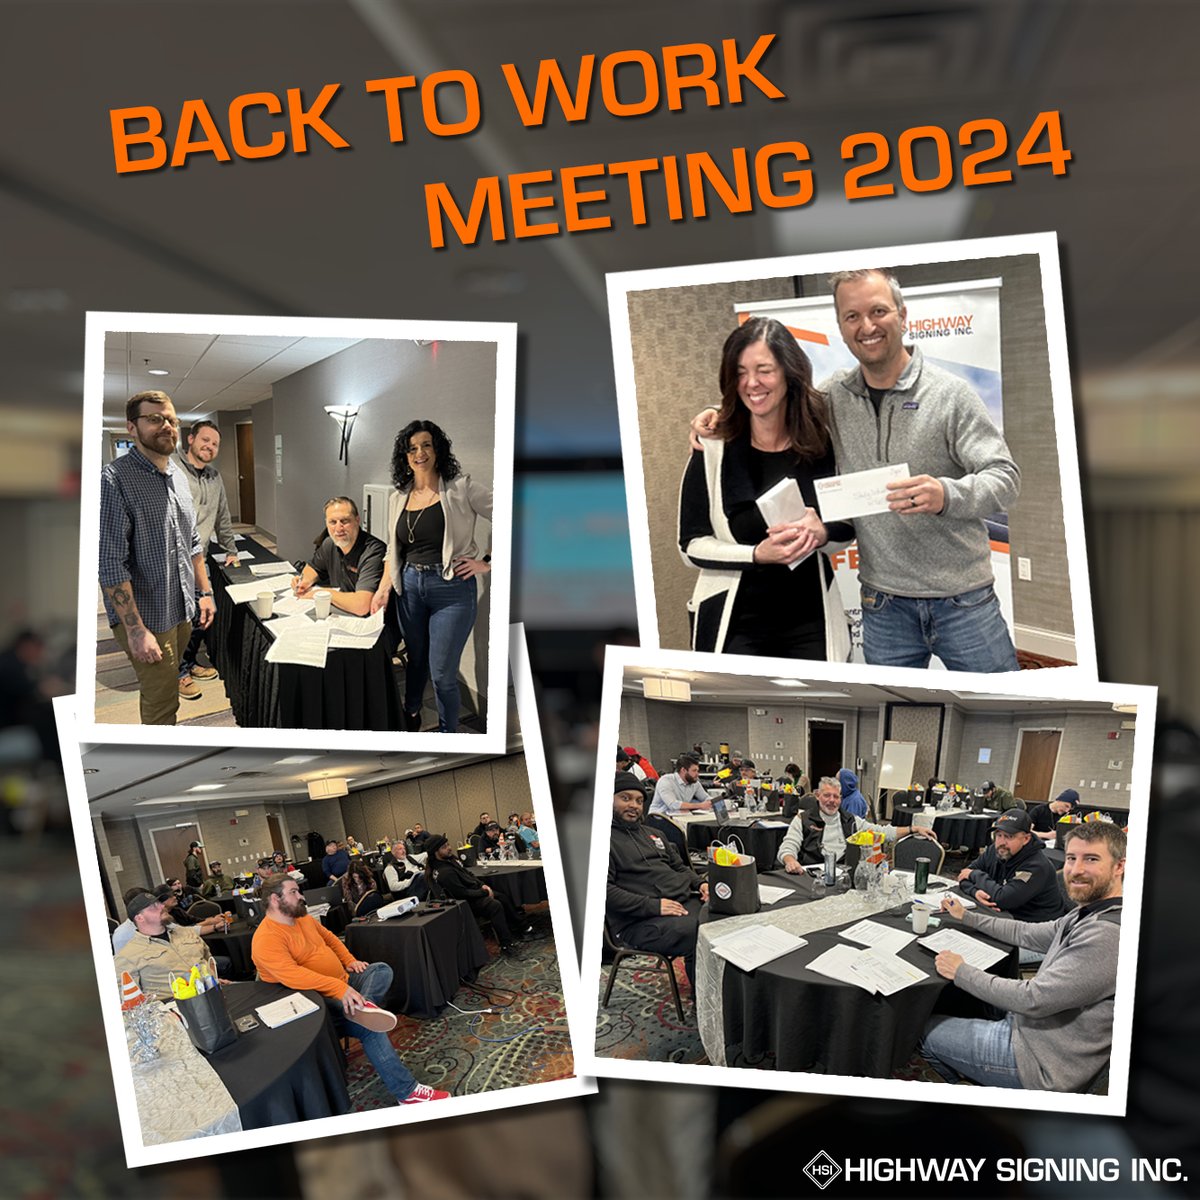 We recently held our Back to Work Meeting, and we are pumped for the year ahead! A huge shout-out to all our employees who are the real MVPs of the road.

#HighwayHeroes #HighwaySigningInc #safety #roadconstruction #trafficcontrol #PavementMarking #construction #transportation